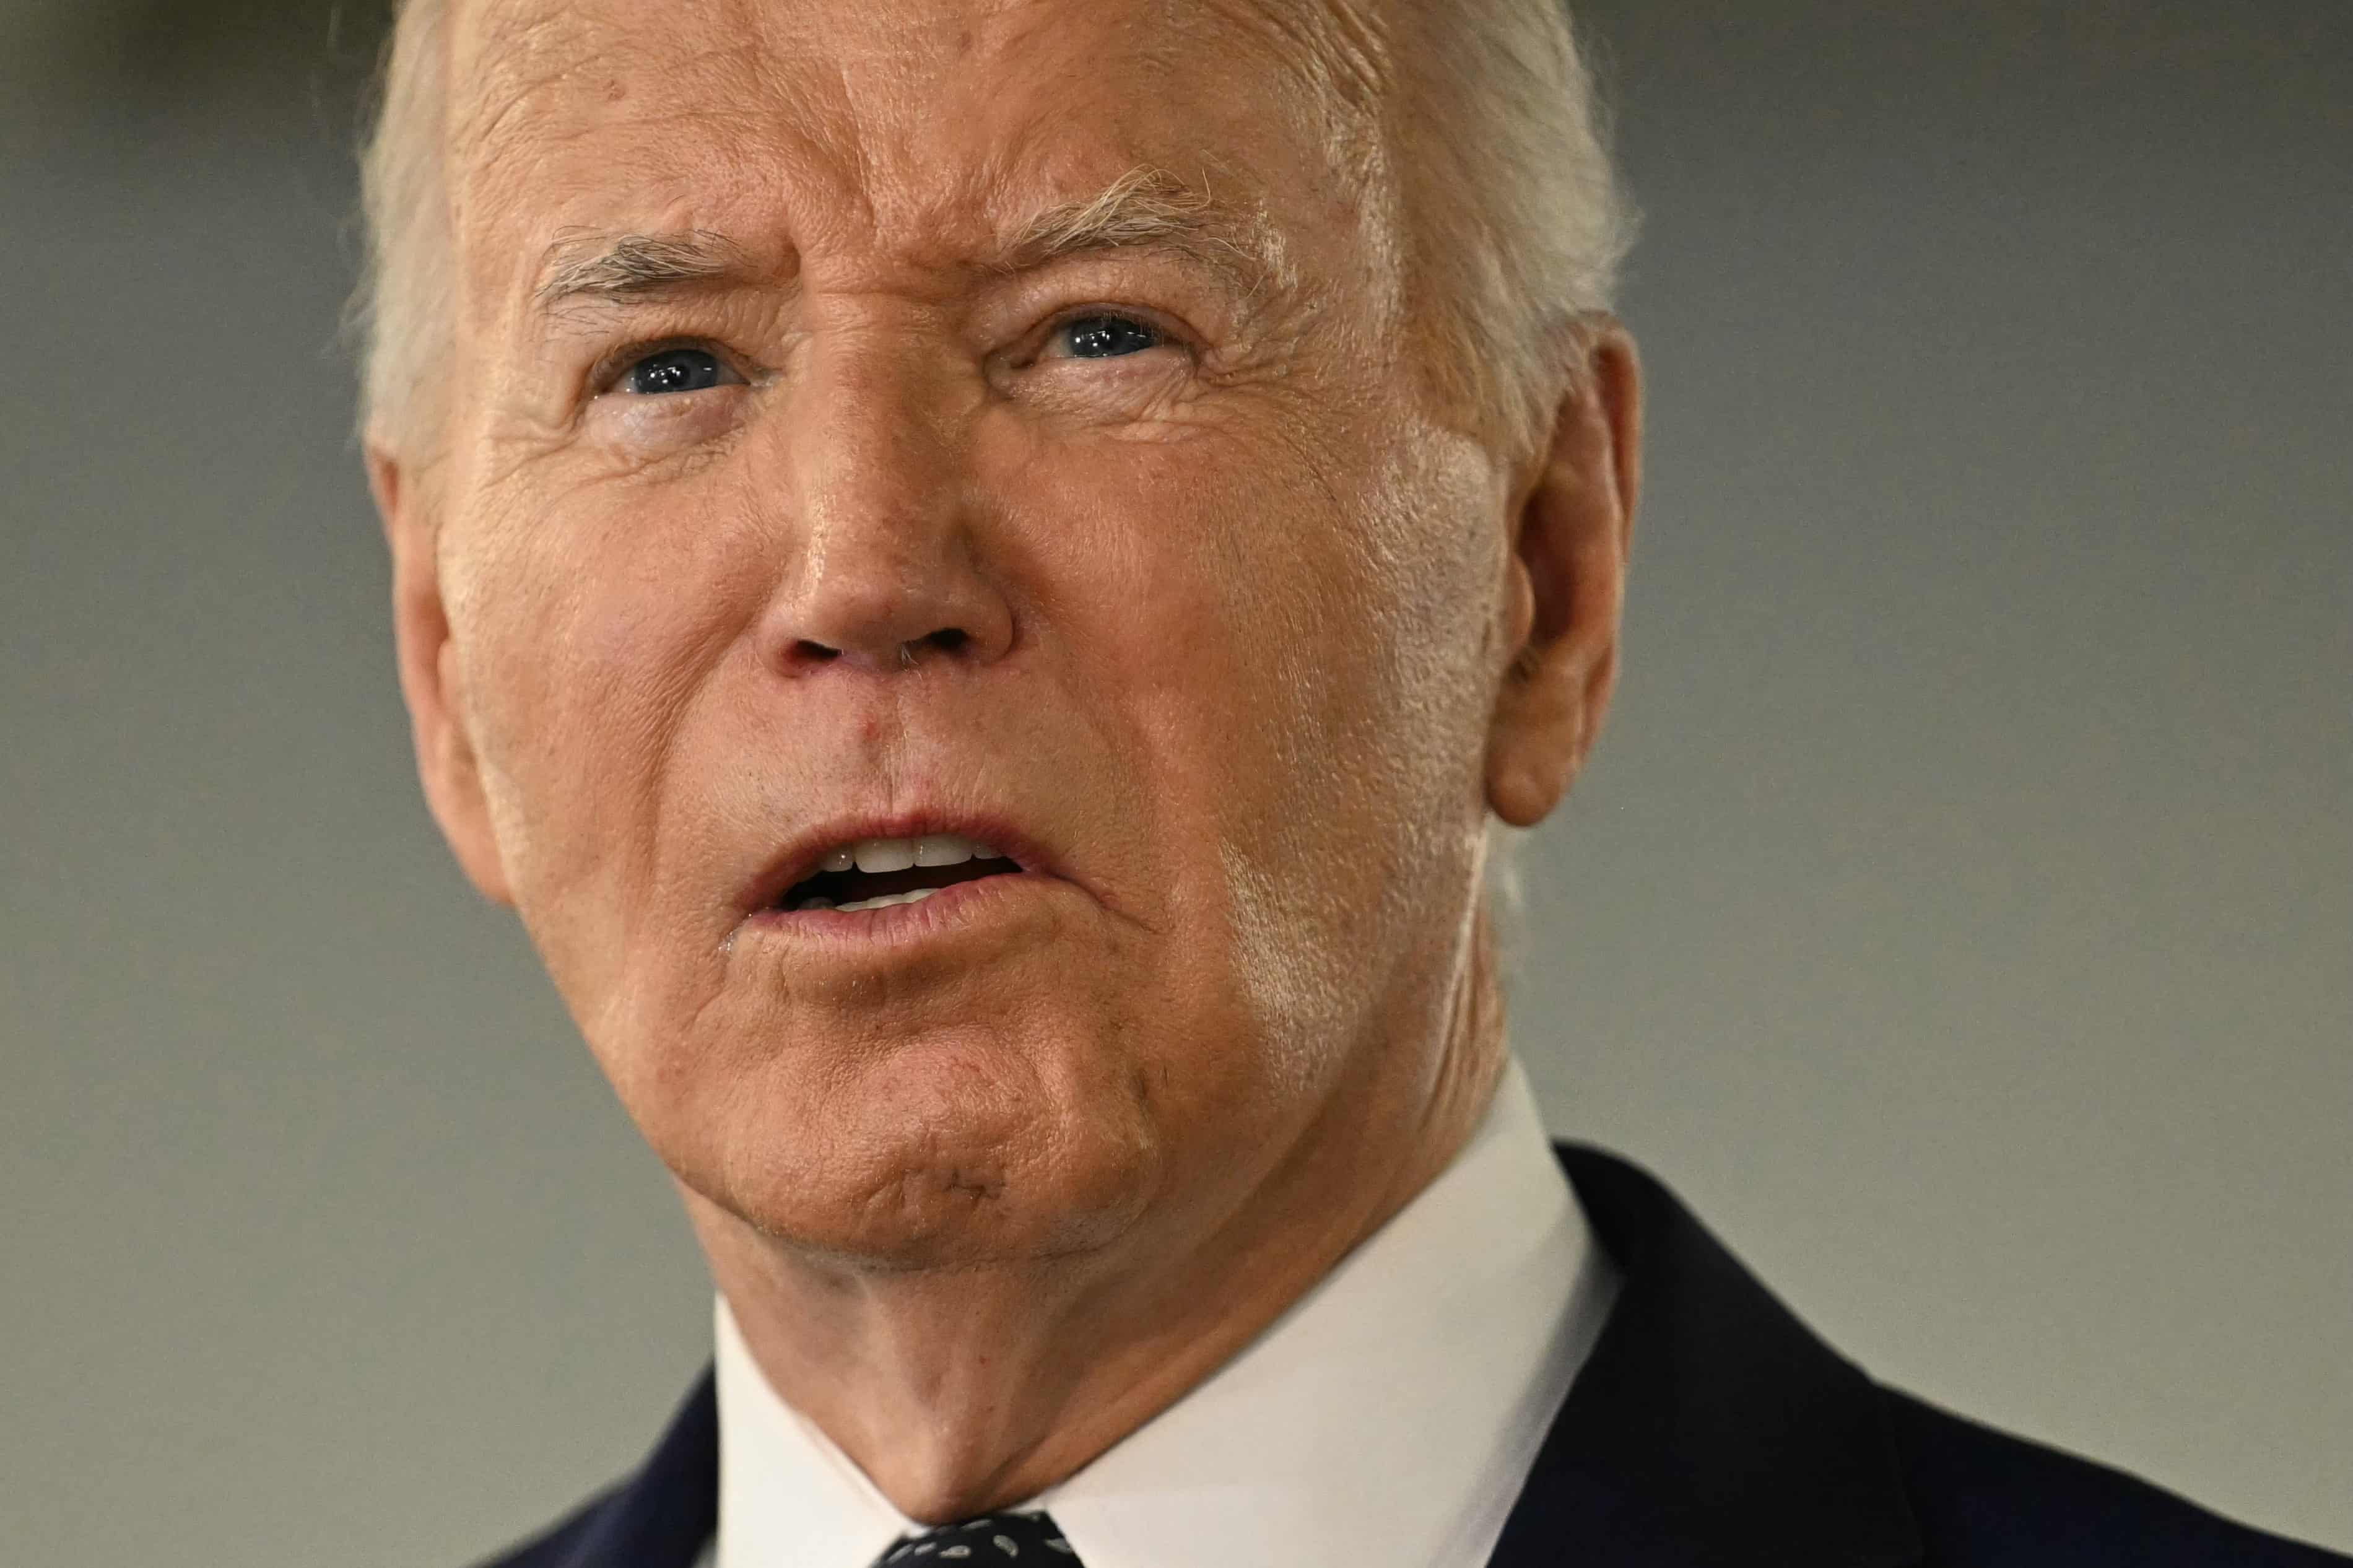 Cracks showing in Democratic support as Biden says he ‘nearly fell asleep on stage’ (theguardian.com)